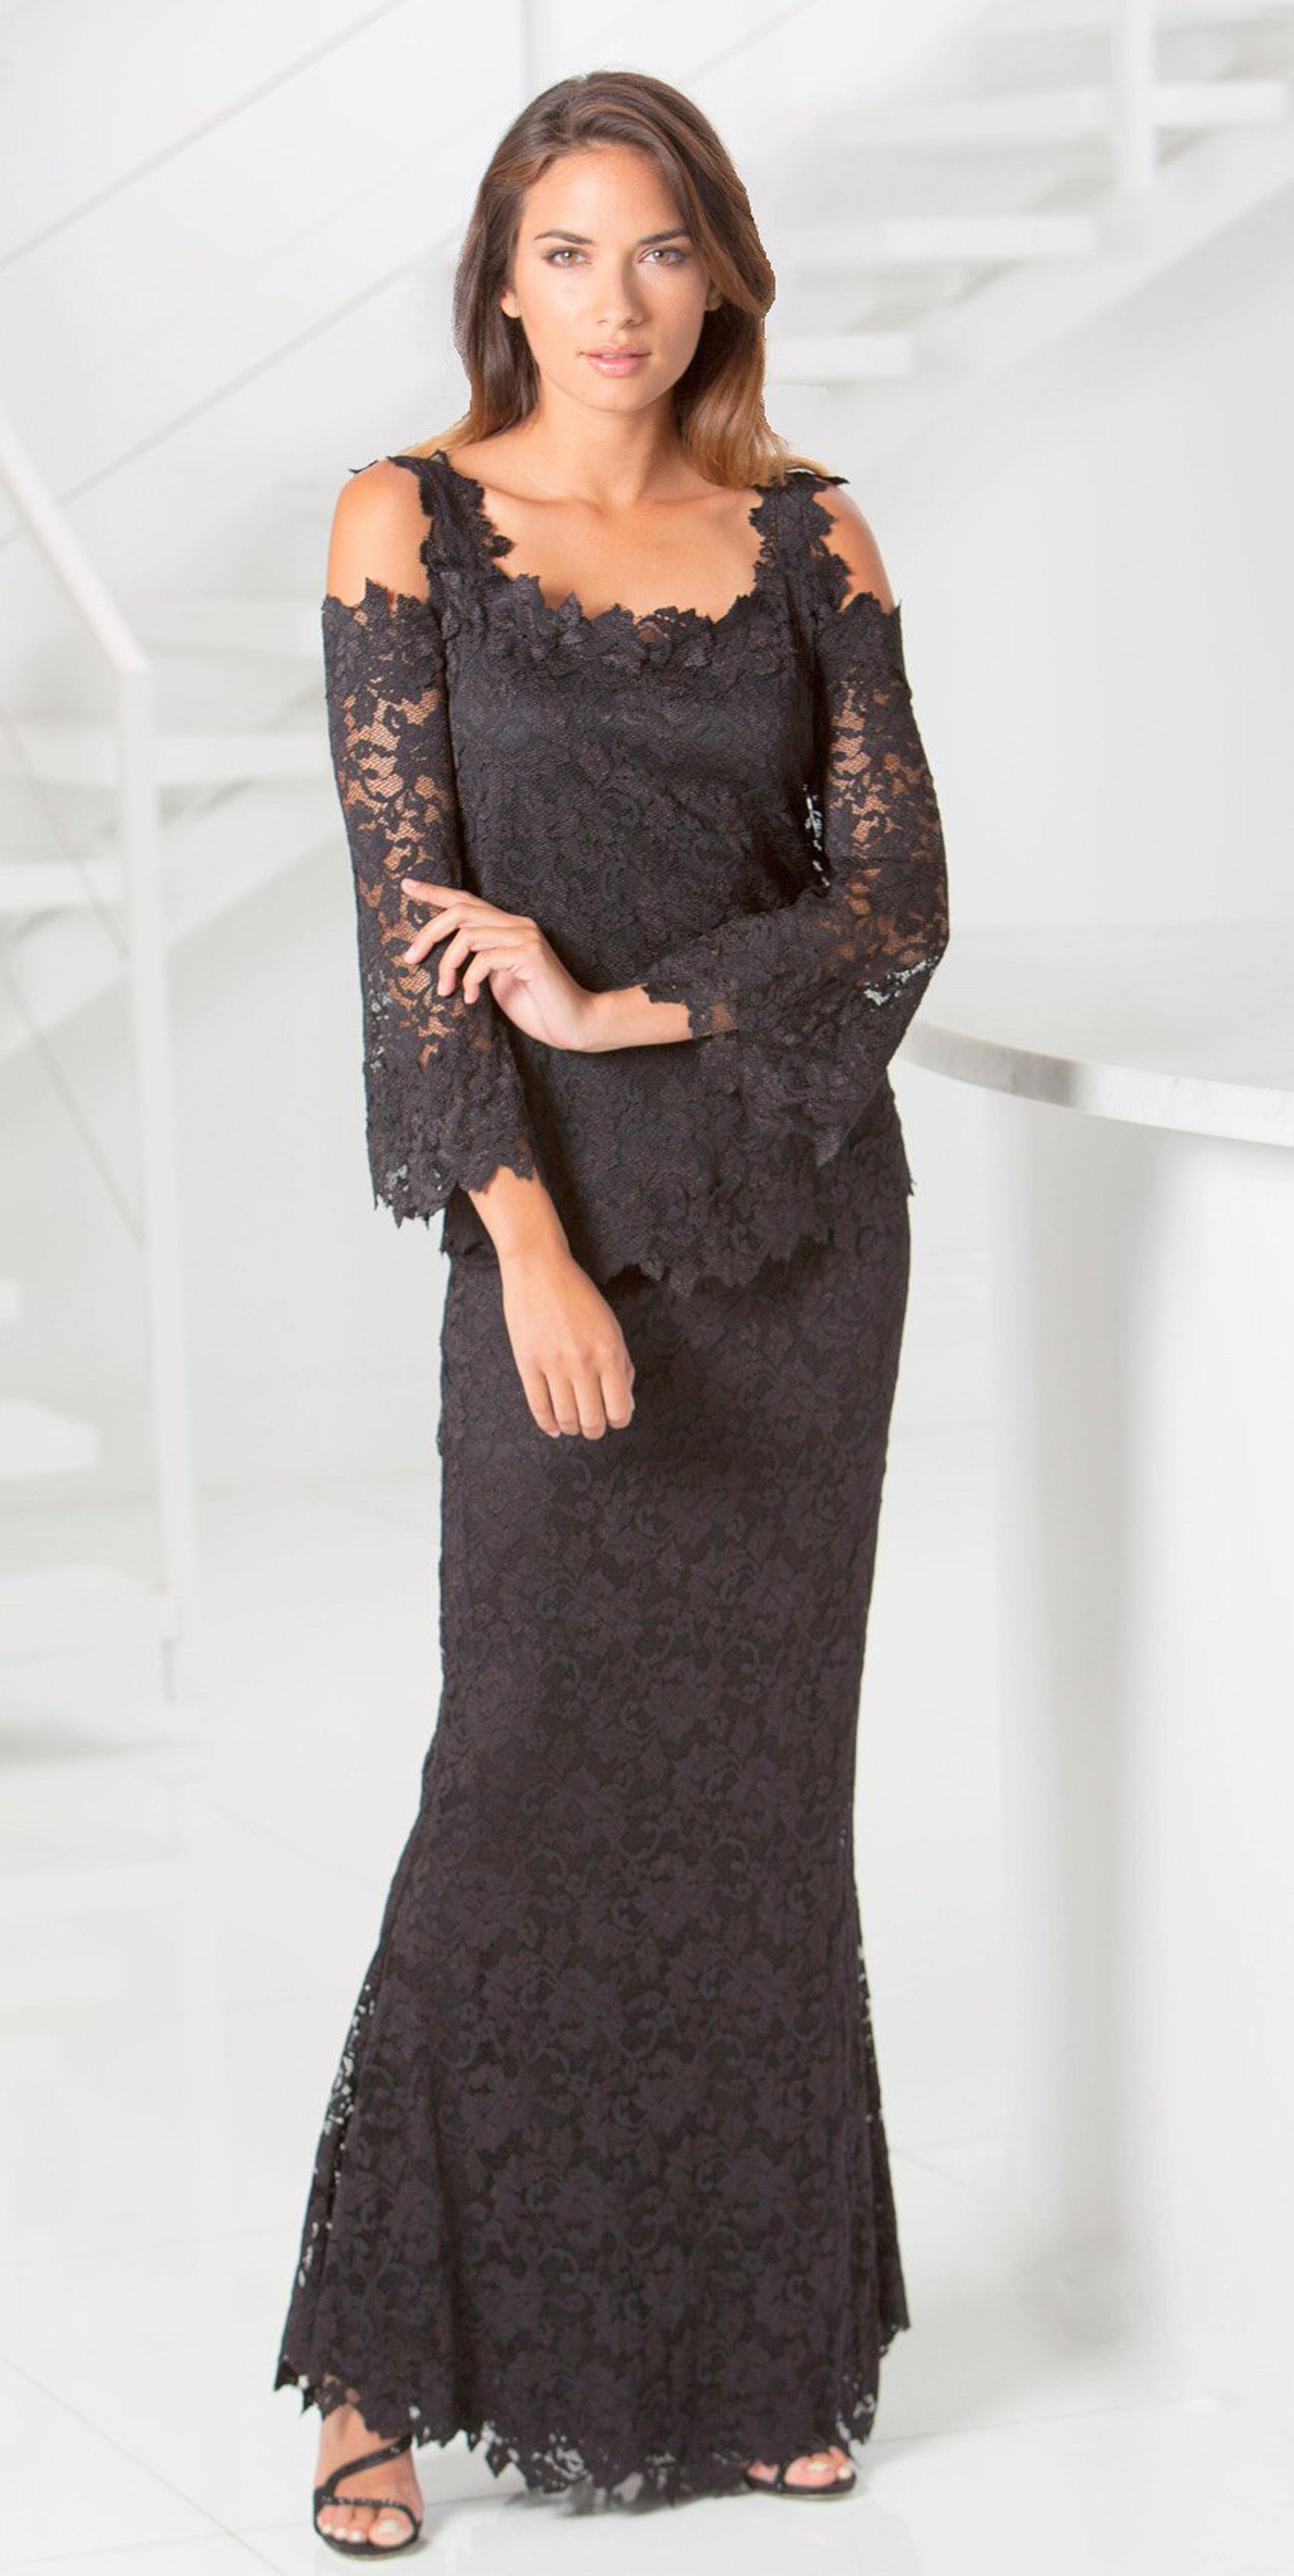 French Lace Cold Shoulder Blouse - B611  (P605 45" French Lace Pant Sold Separately) - Sara Mique Evening Wear